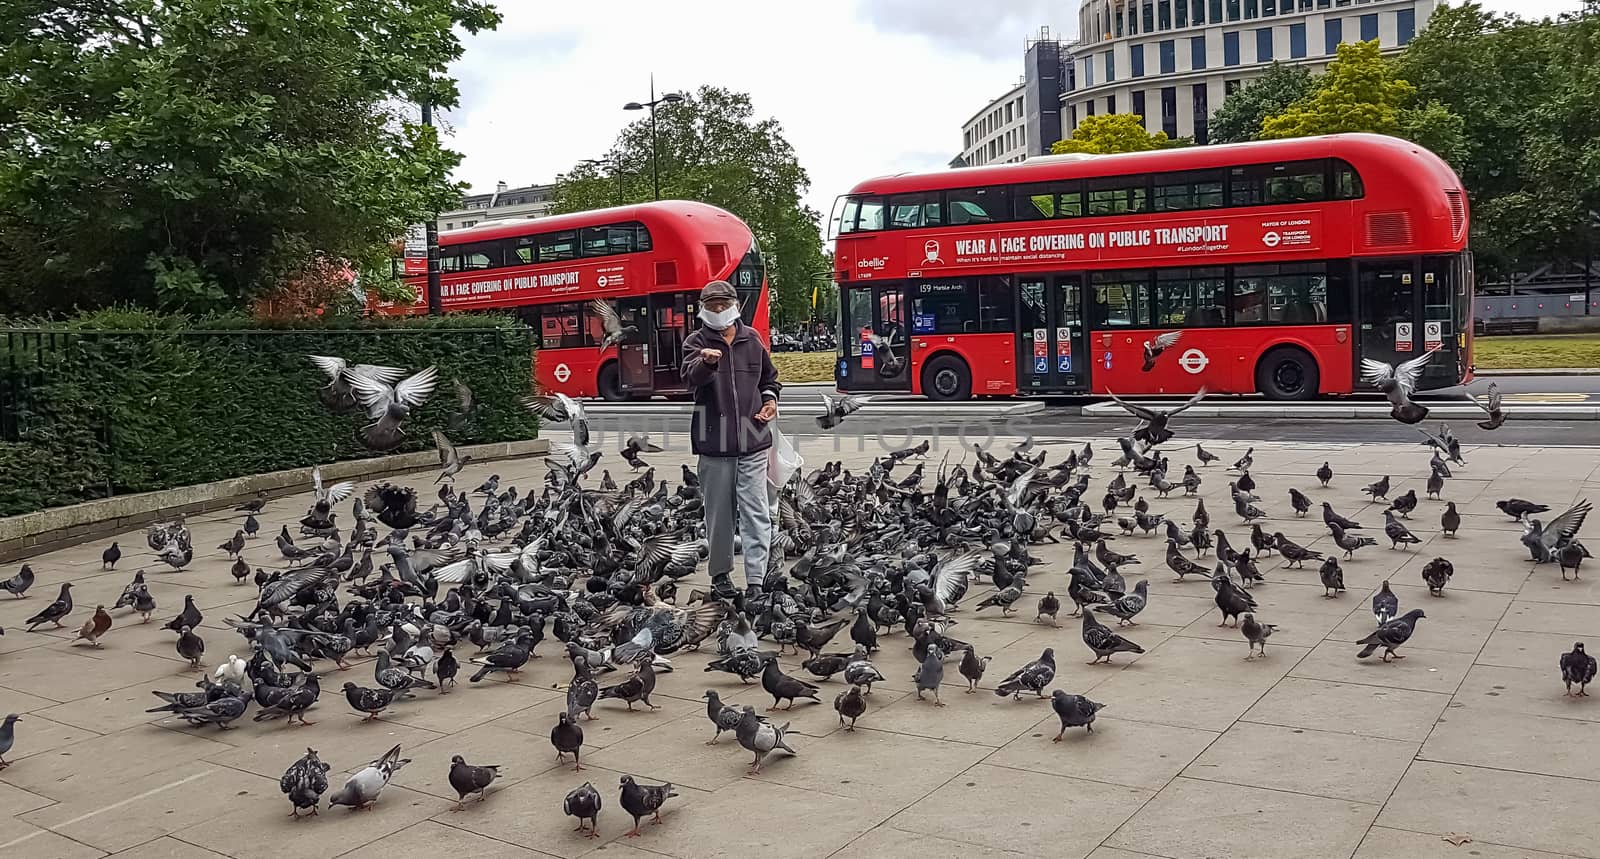 London, UK - July 8, 2020: An old man standing at Hyde Park entrance surrounded by pigeons next to modern red double-decker buses waiting for people in central London by DamantisZ